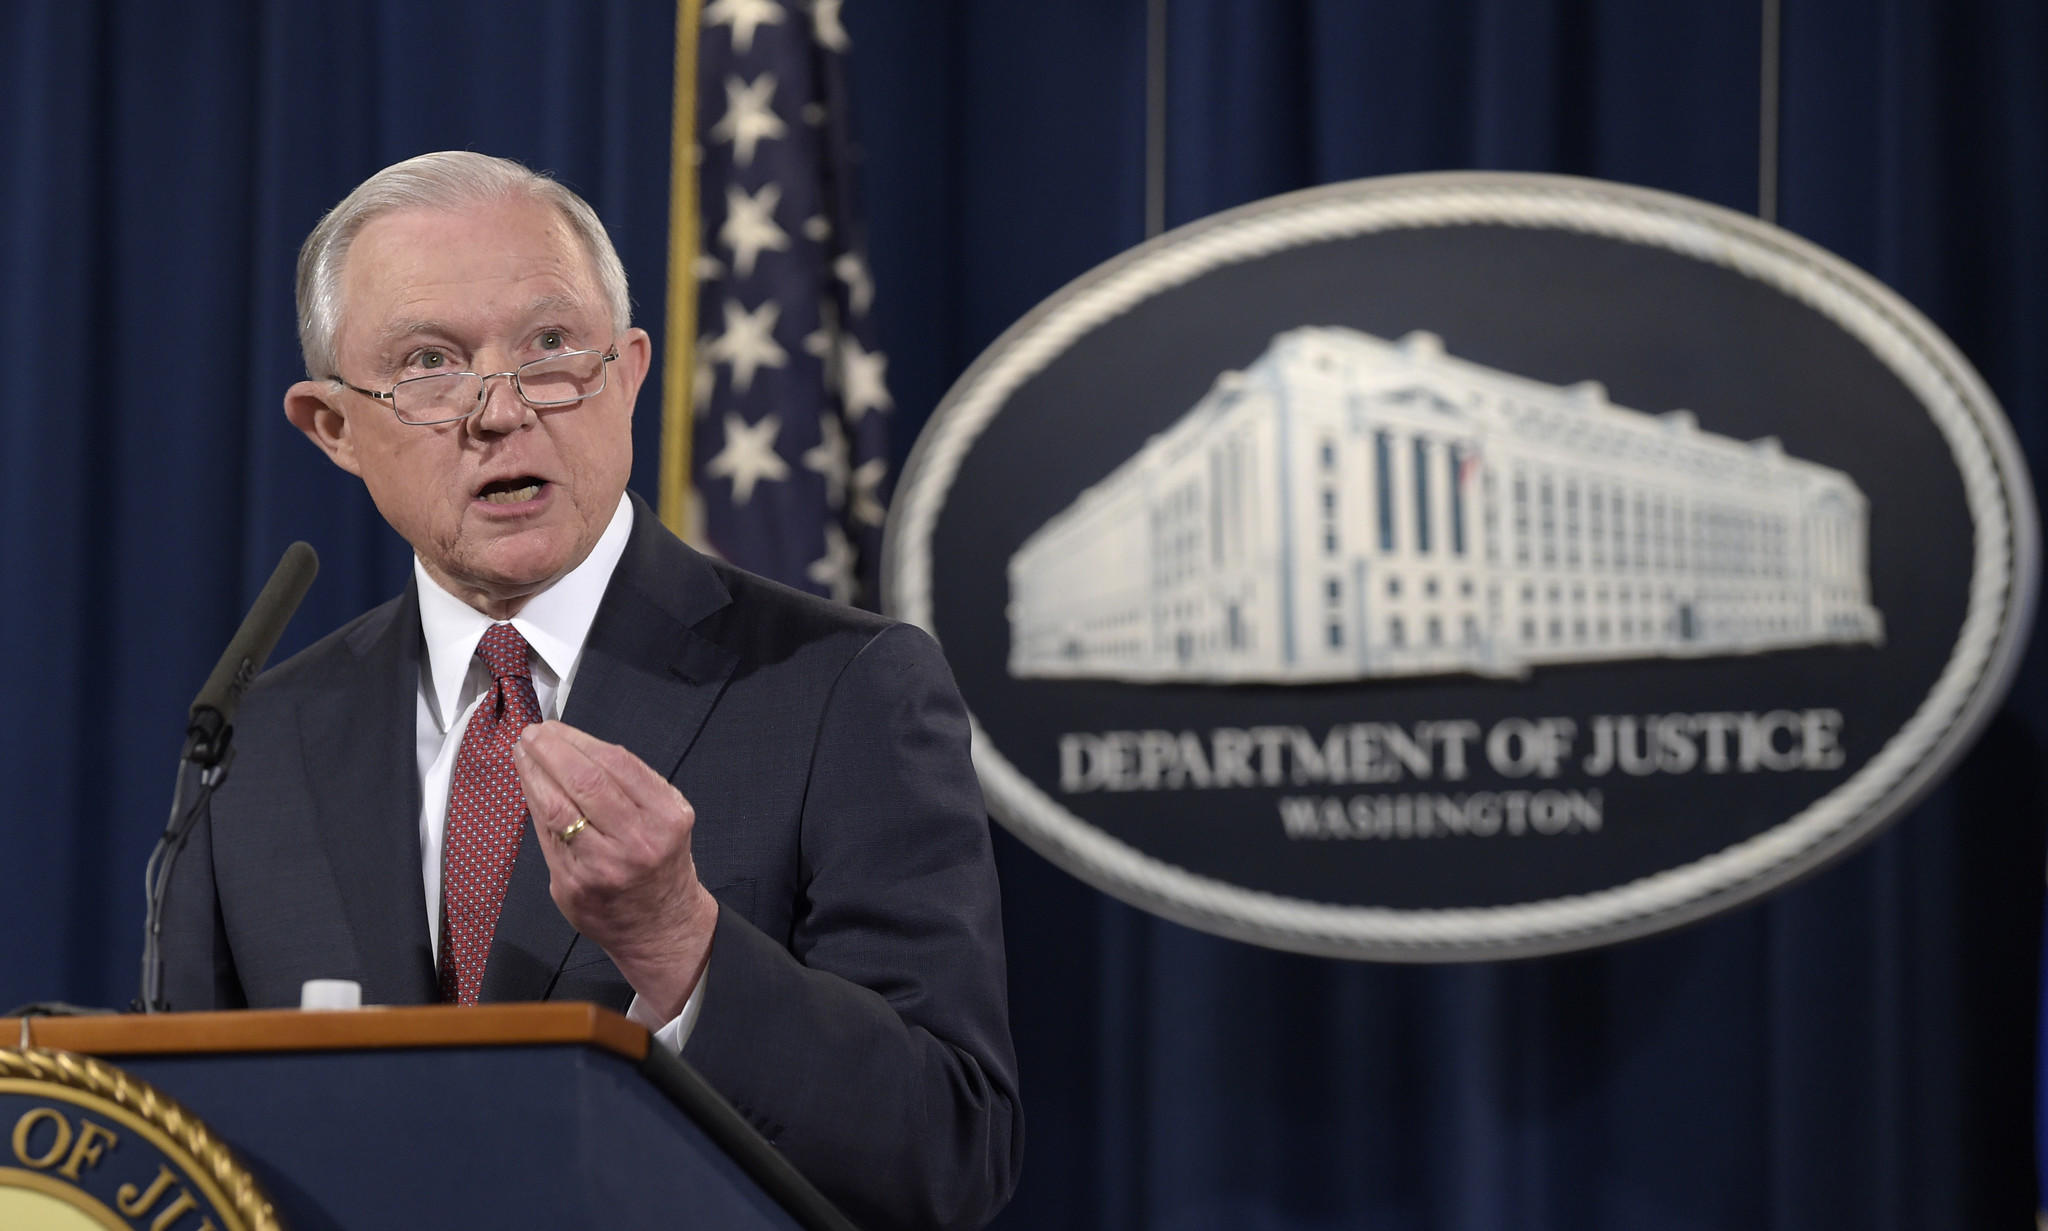 U.S. Atty. Gen. Jeff Sessions speaks at the Justice Department about President Obama's Deferred Action for Childhood Arrivals program. (Susan Walsh / Associated Press)